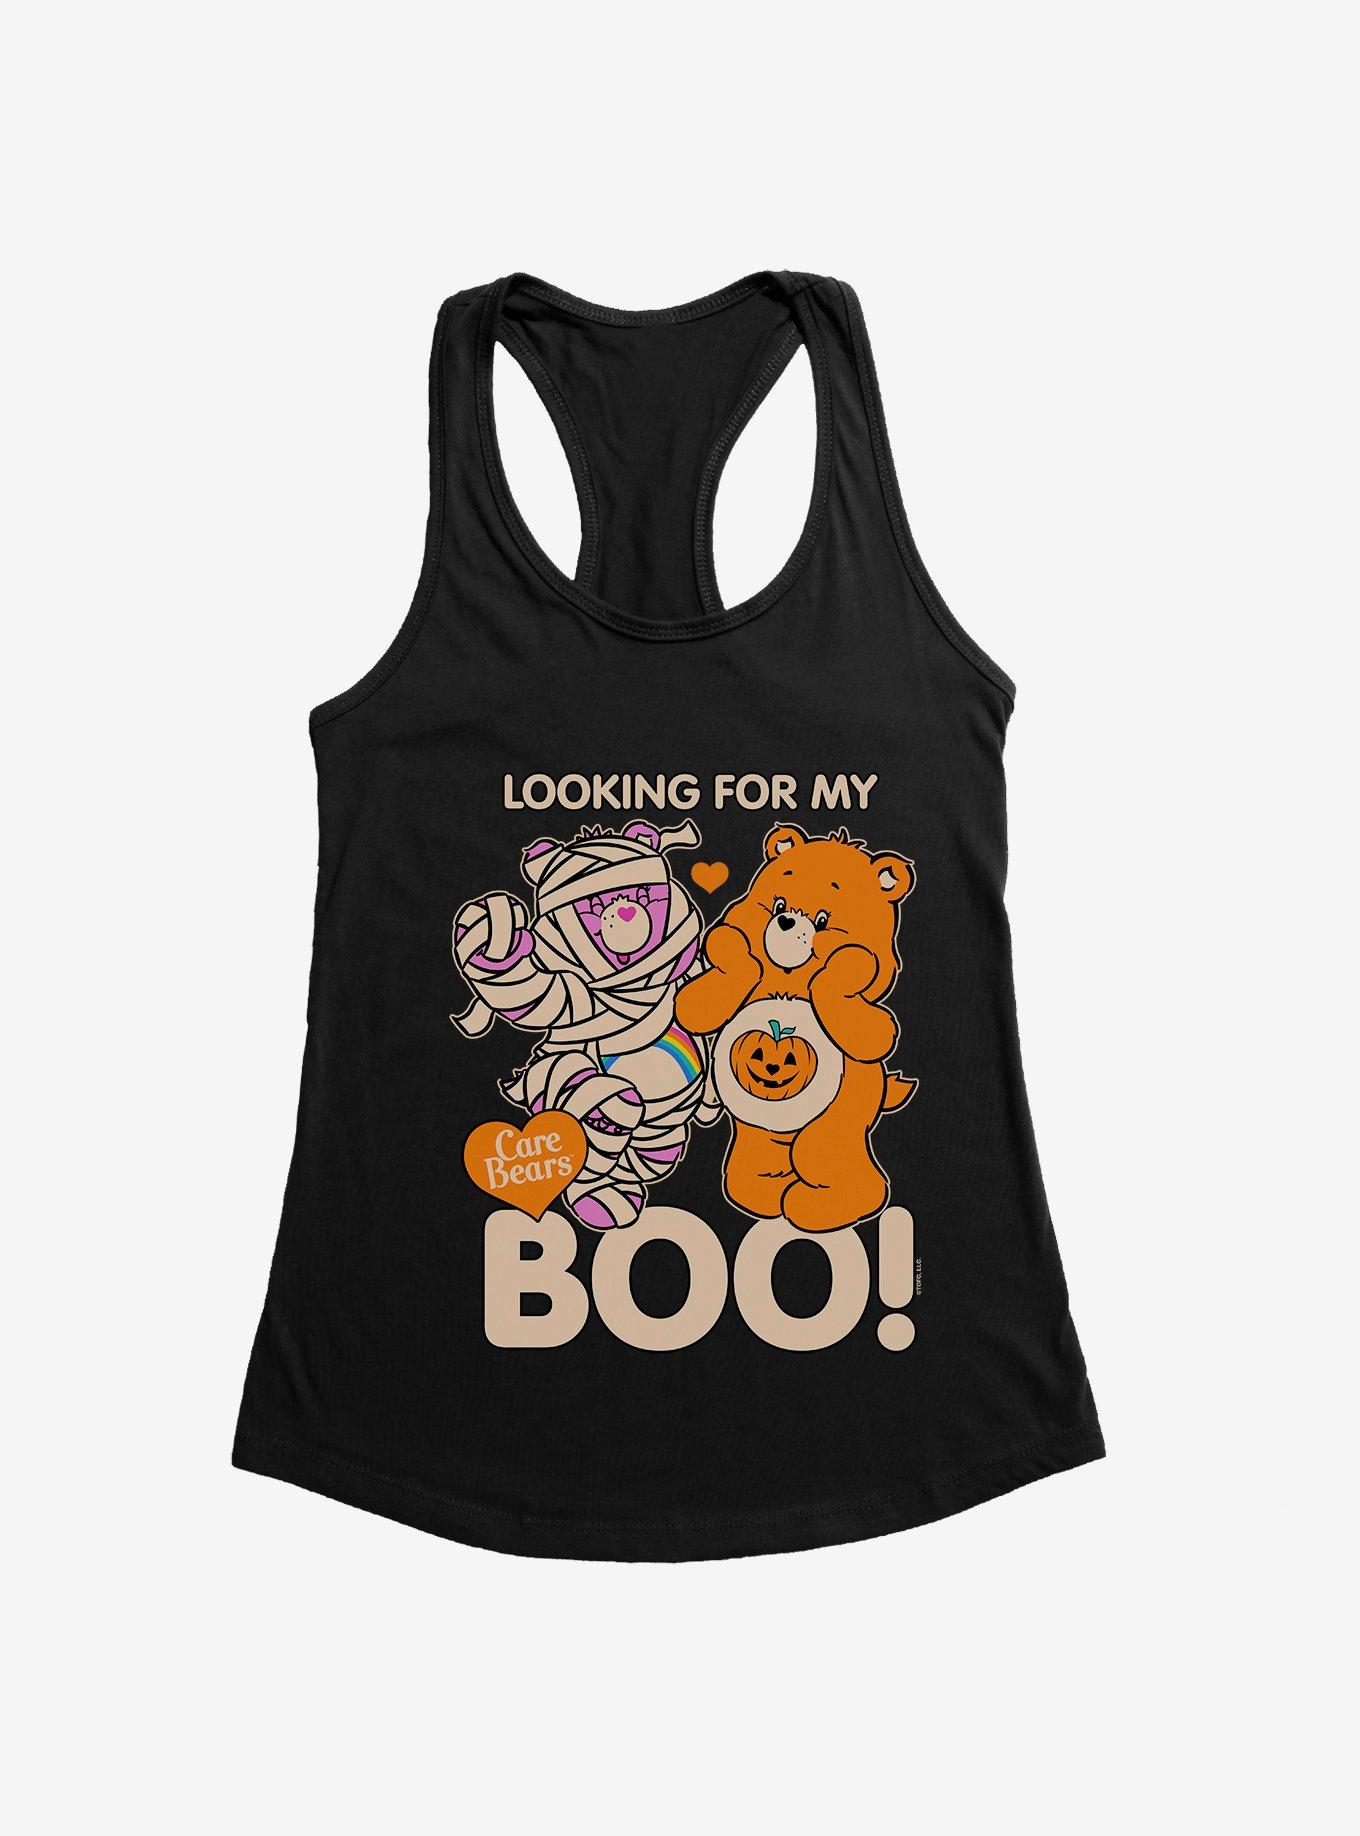 Care Bears Looking For My Boo Girls Tank